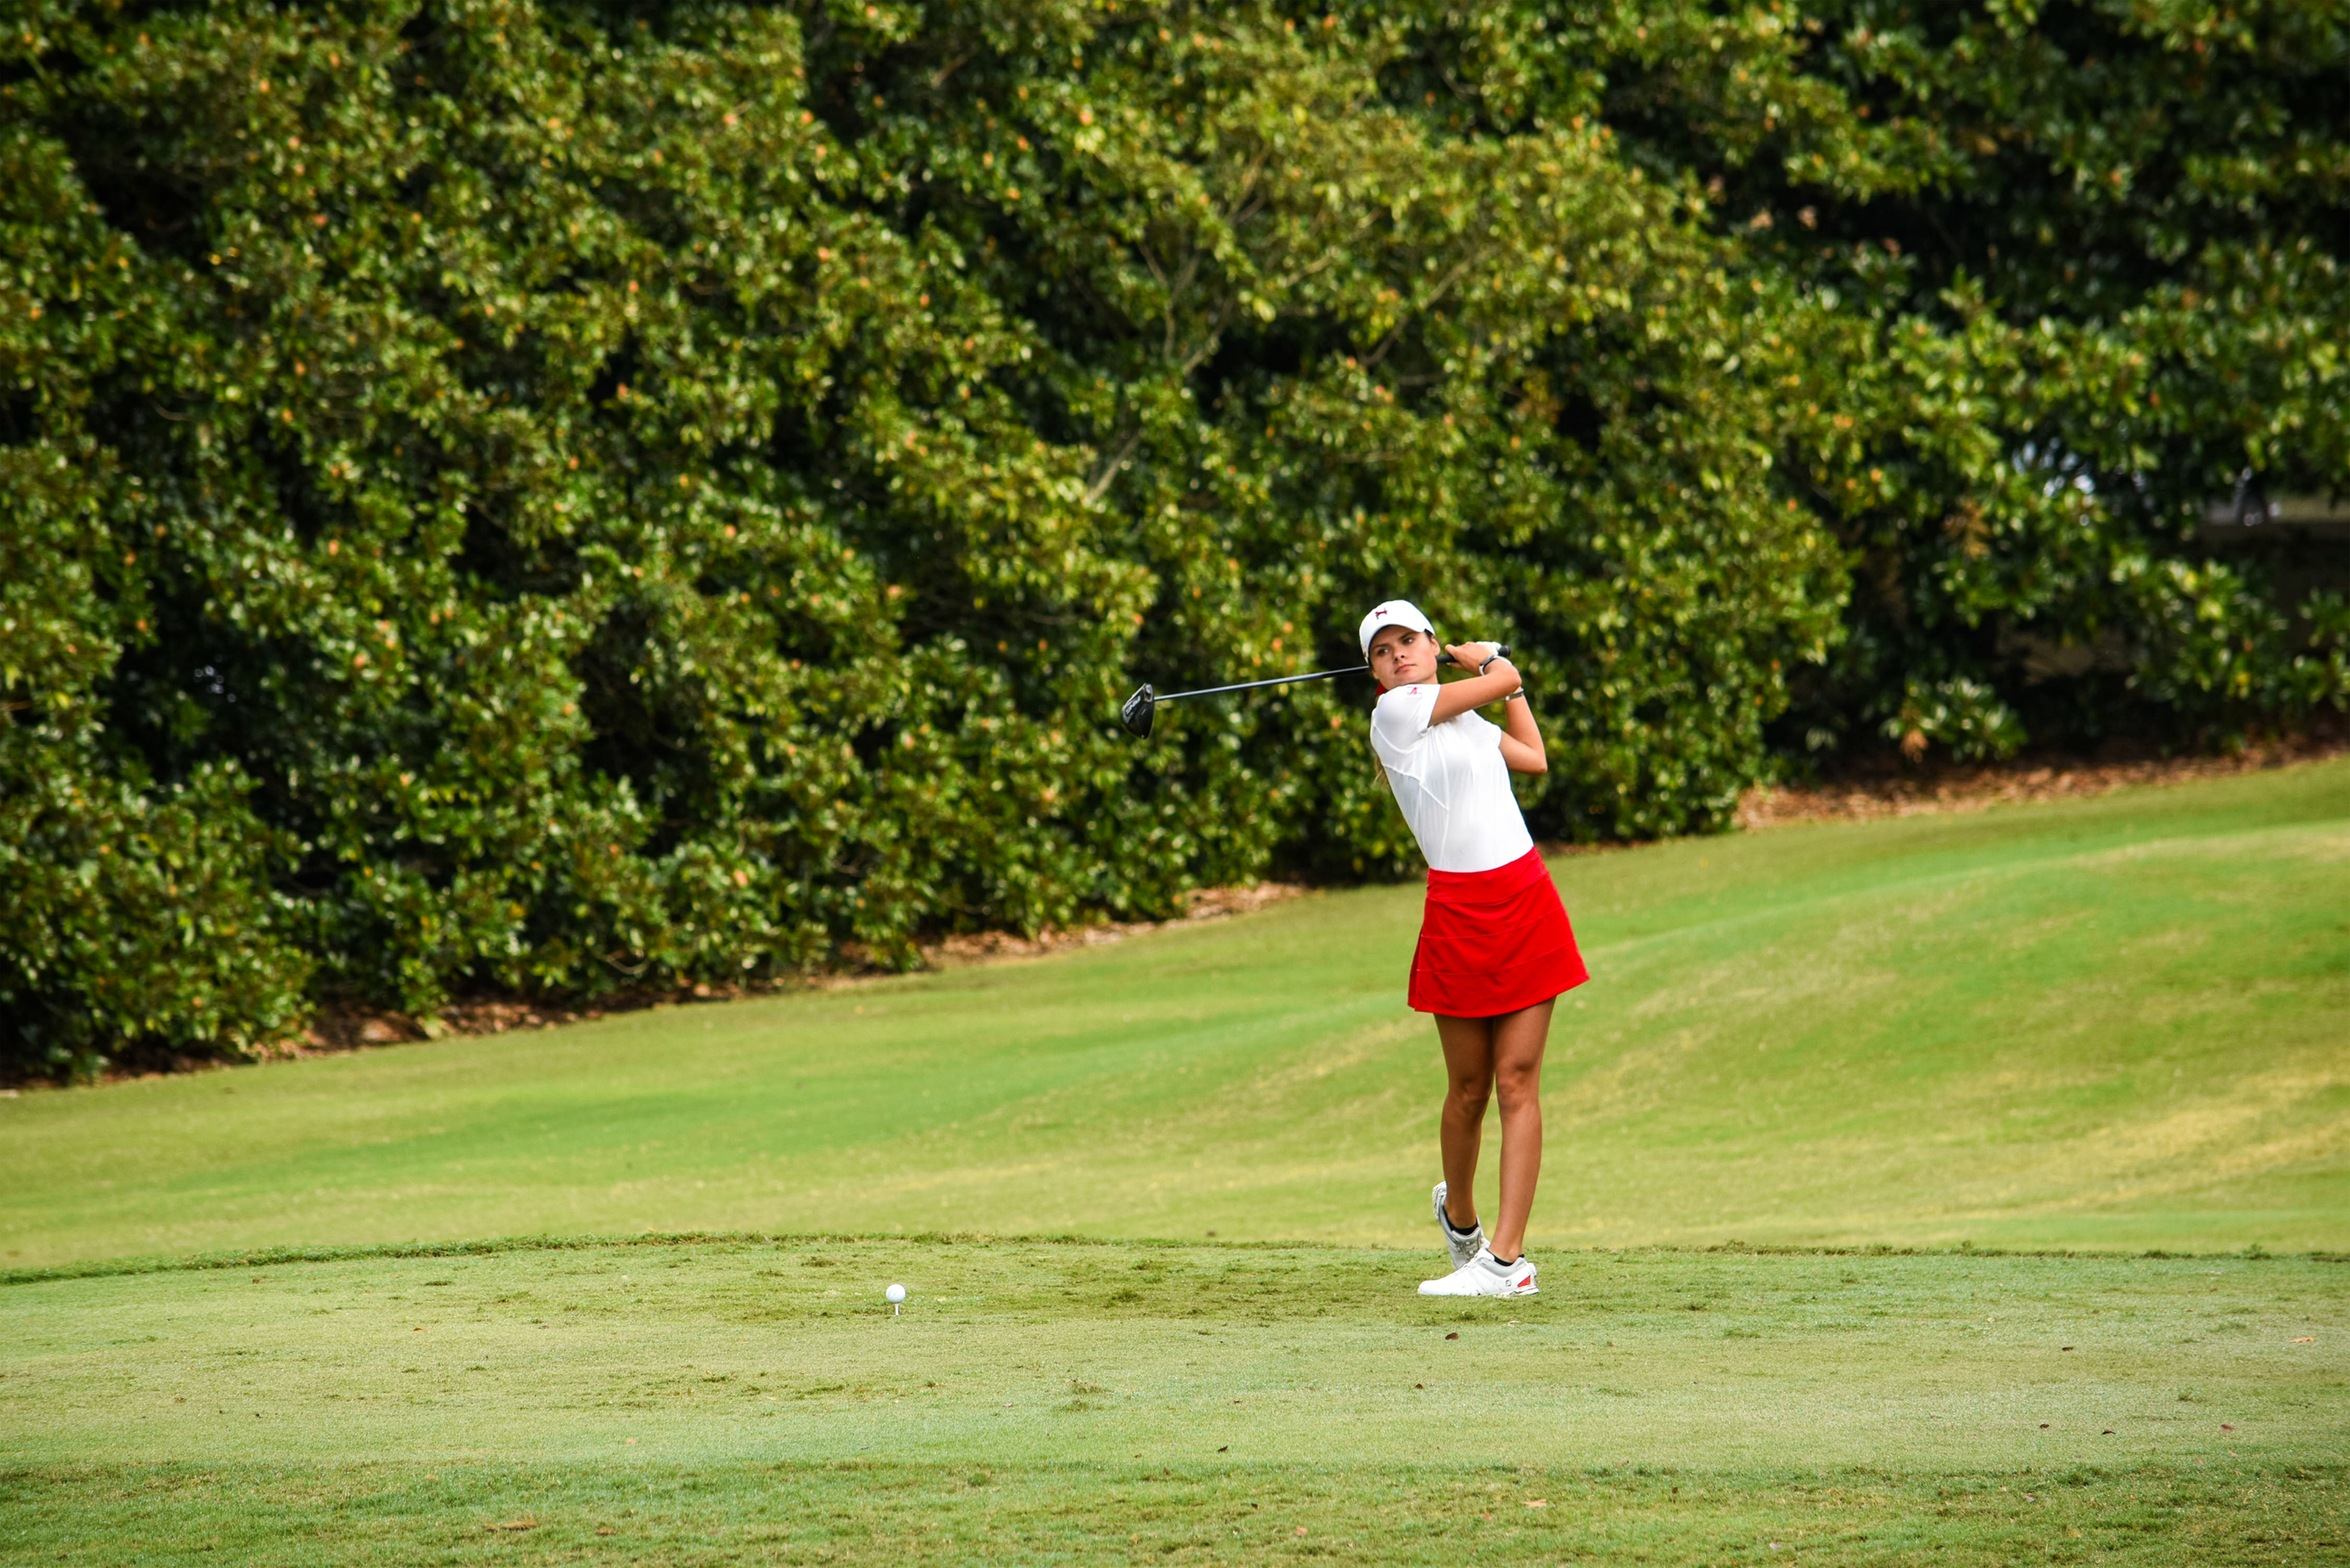 Hawks lead after round 1 of the Chick-fil-a Collegiate Invitational